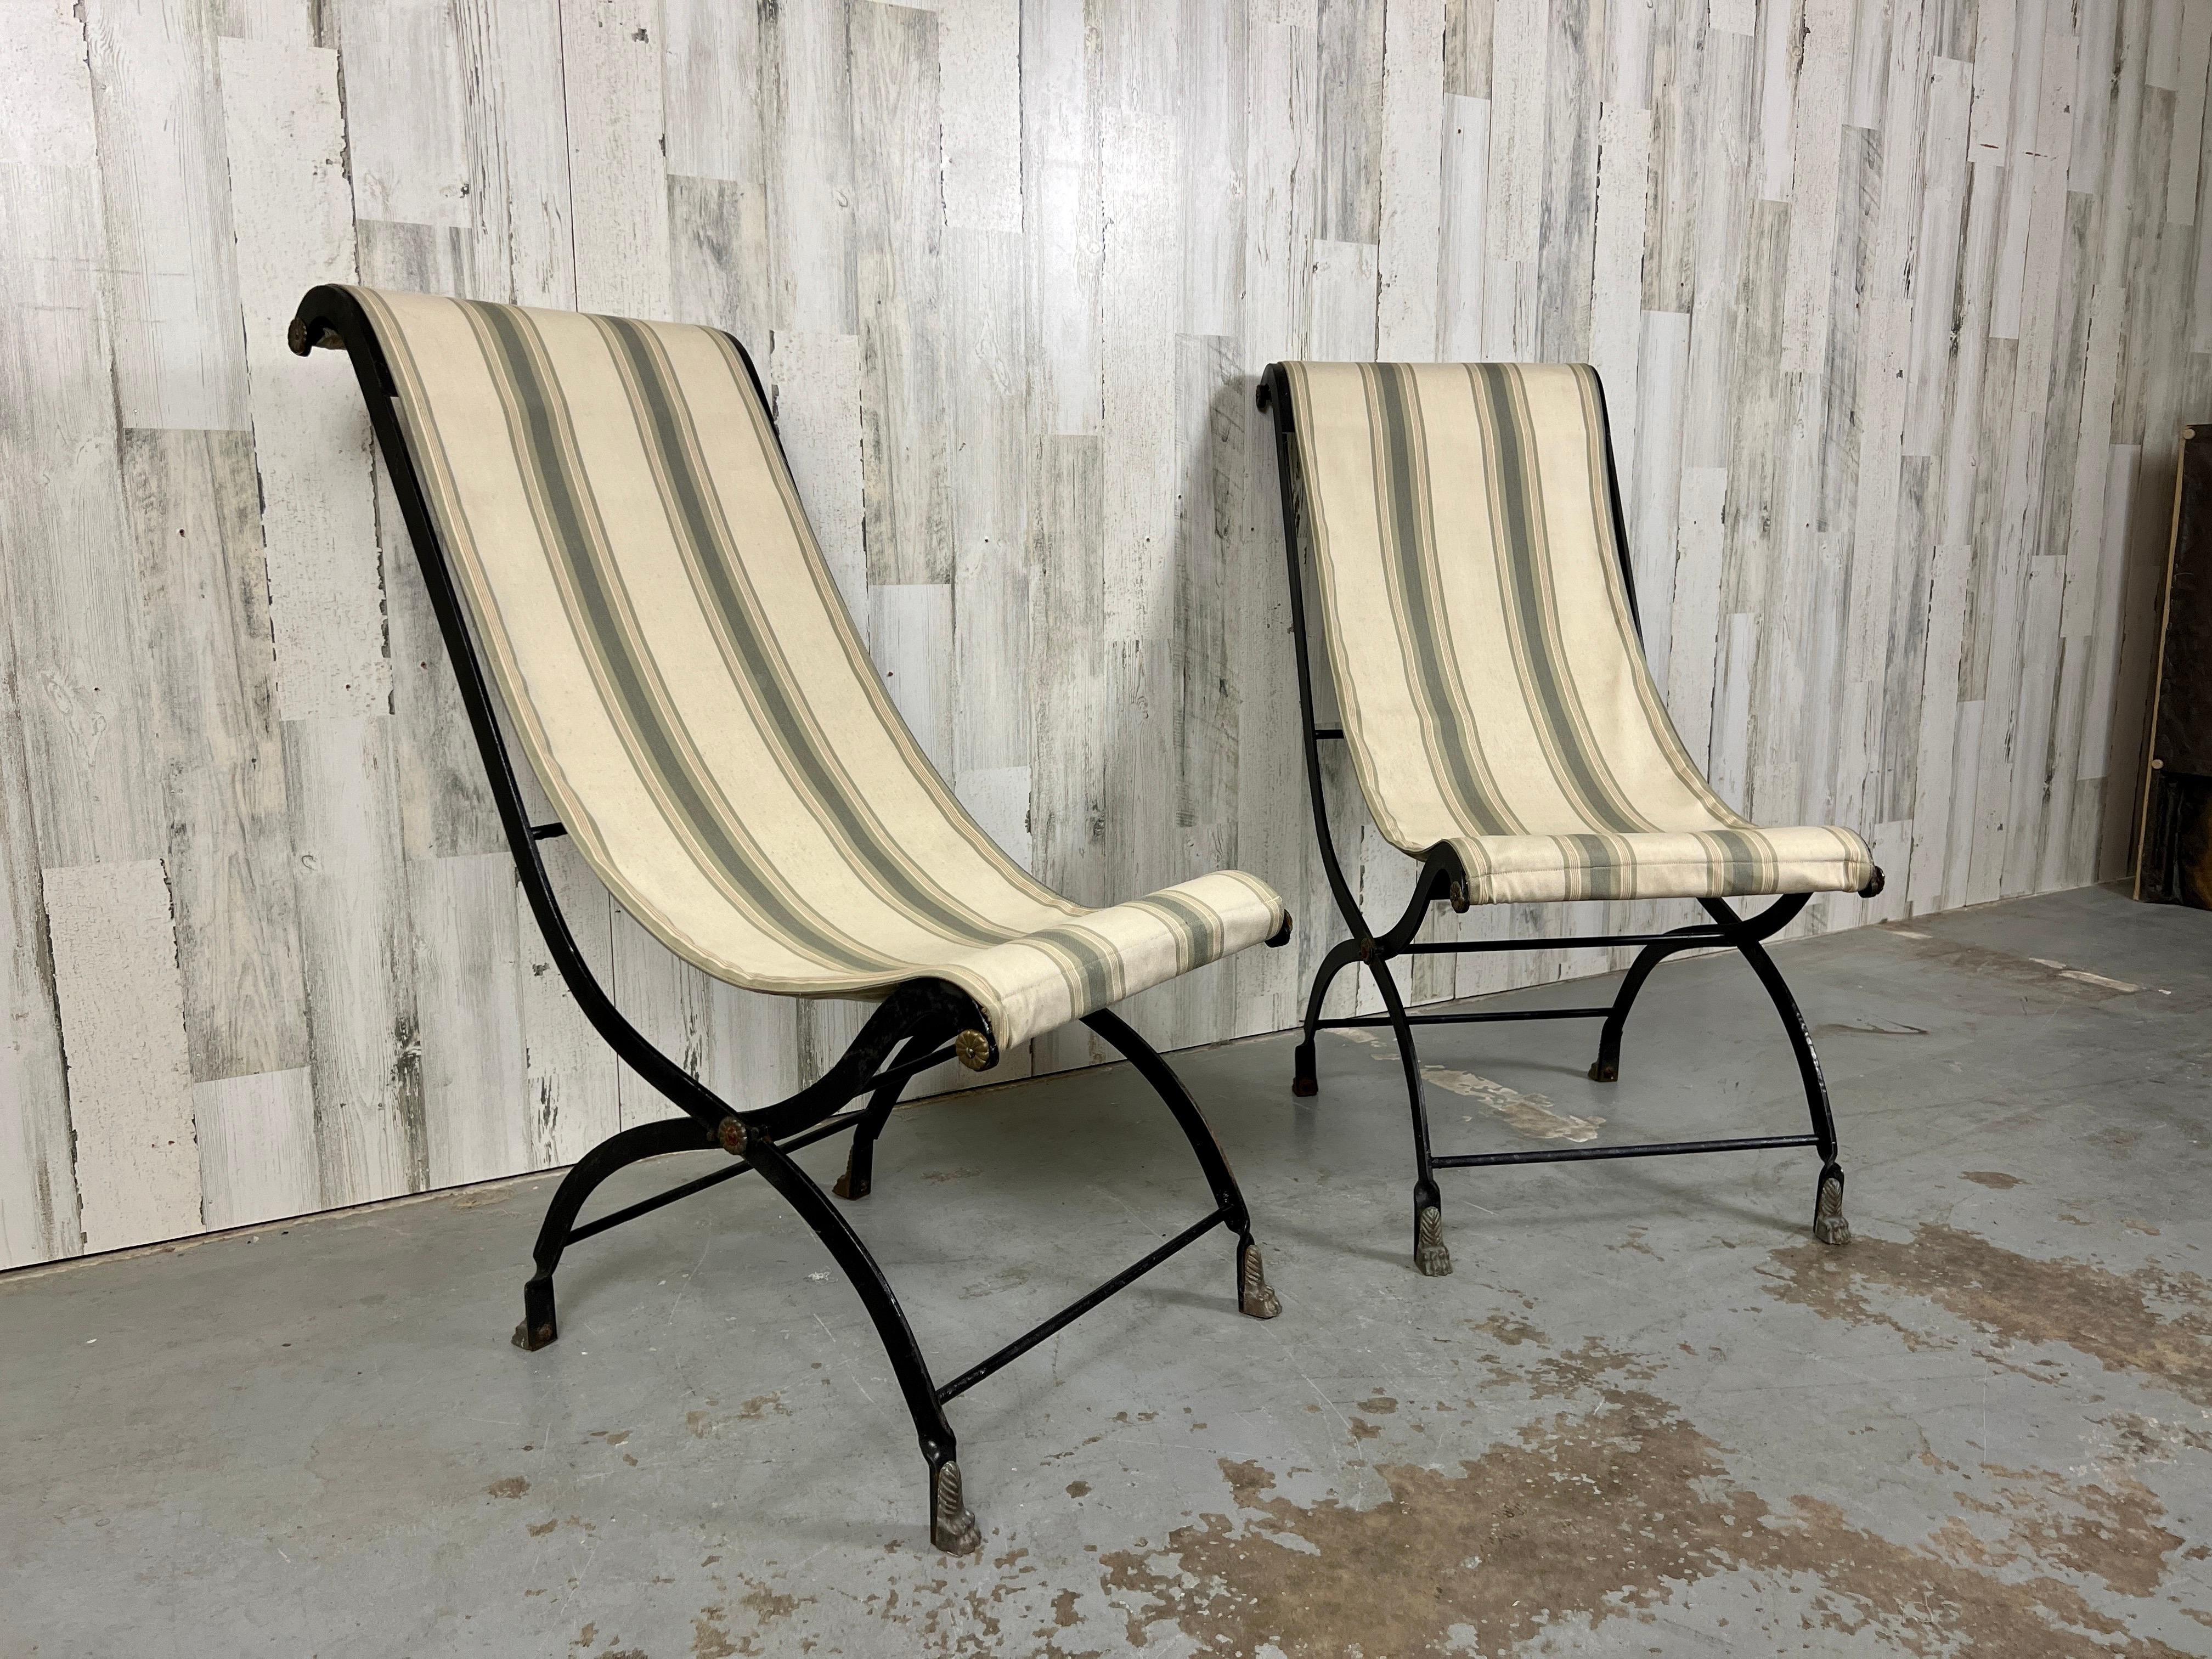 Vintage Iron Folding Sling Chairs  In Good Condition For Sale In Denton, TX